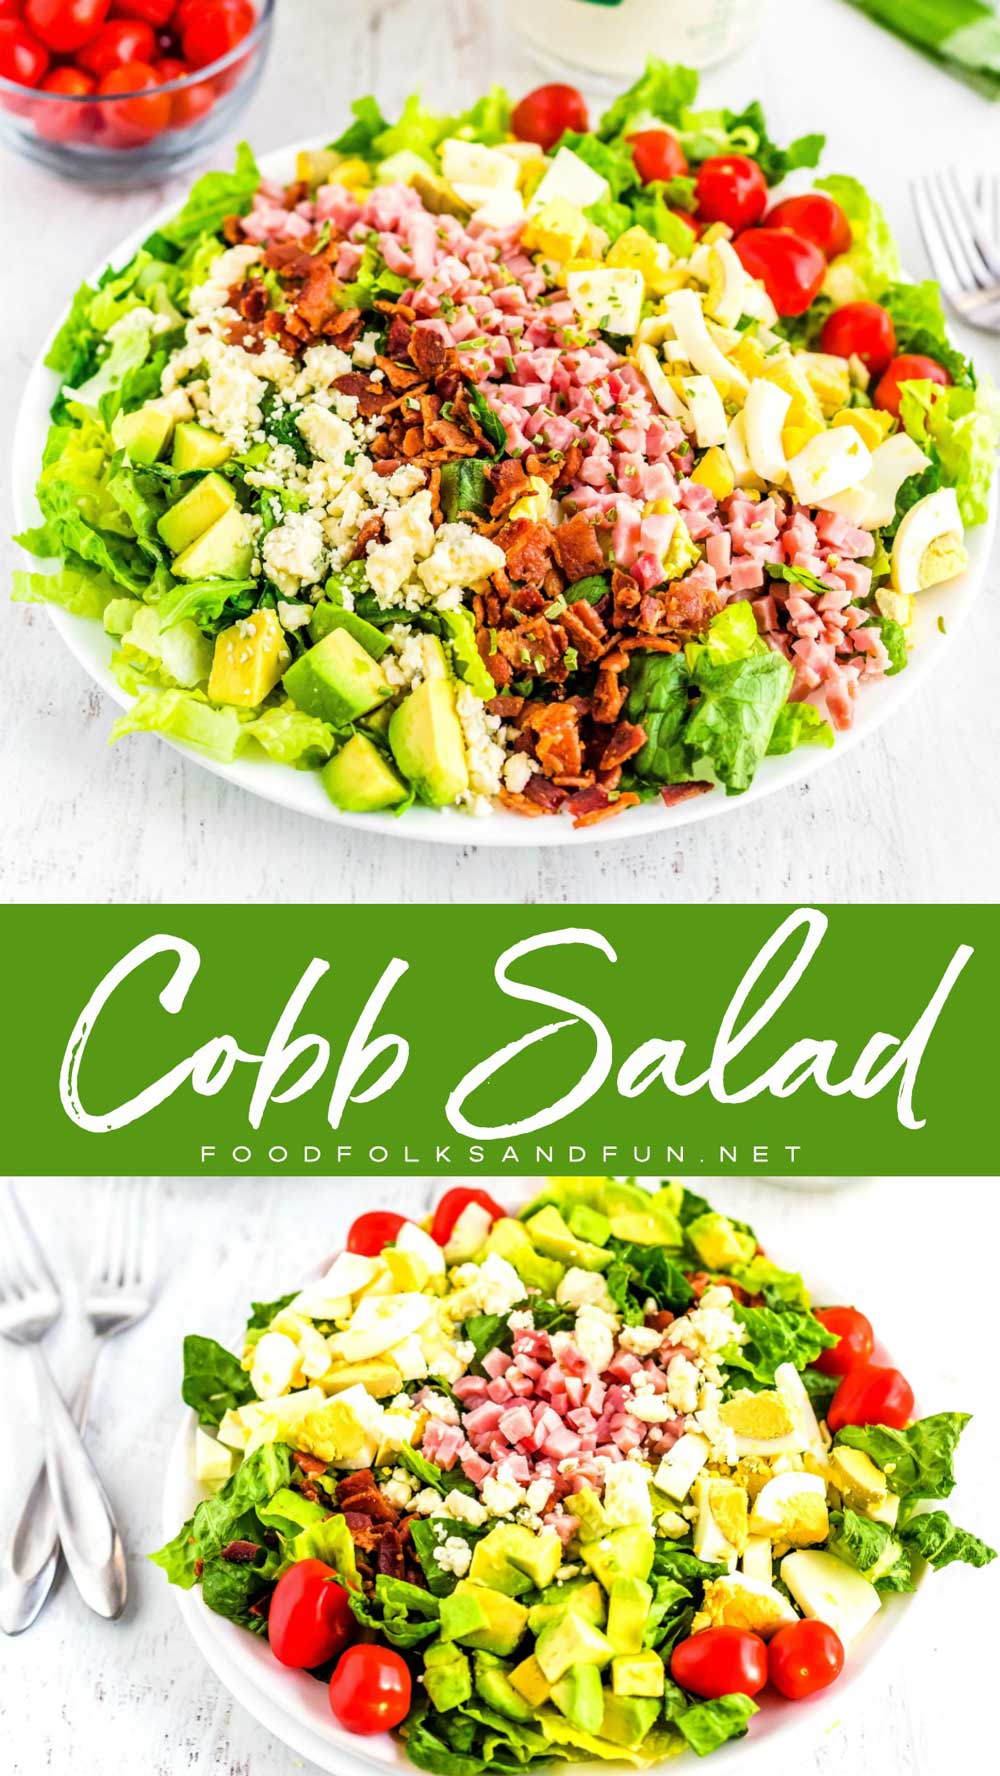 This Cobb Salad recipe is the perfect entree salad recipe. It’s also a great way to use up leftover Easter ham and hard boiled eggs. #eggs #EggsRecipe #HardBoiledEggs #Salad #SaladRecipe #EasyRecipe #ComfortFood #Easter #EasterRecipe #LeftoverHam #EasterHam #foodfolksandfun via @foodfolksandfun